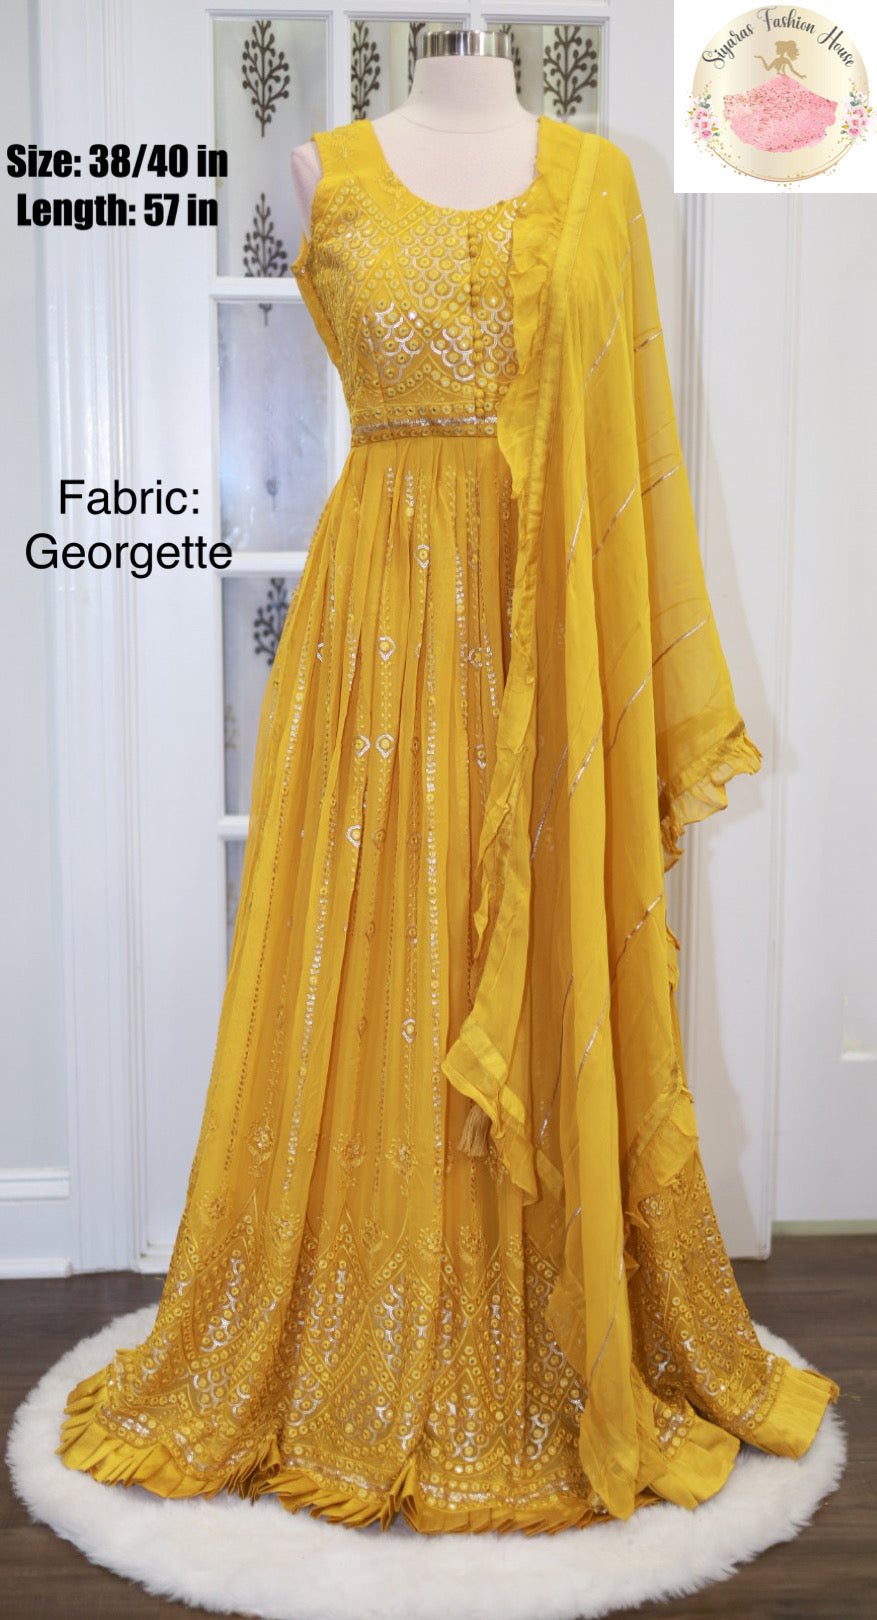 Gorgeous PartyWear Long gown in pure Georgette material with heavy Embroidery and sequin work. comes with matching Ruffle Dupatta